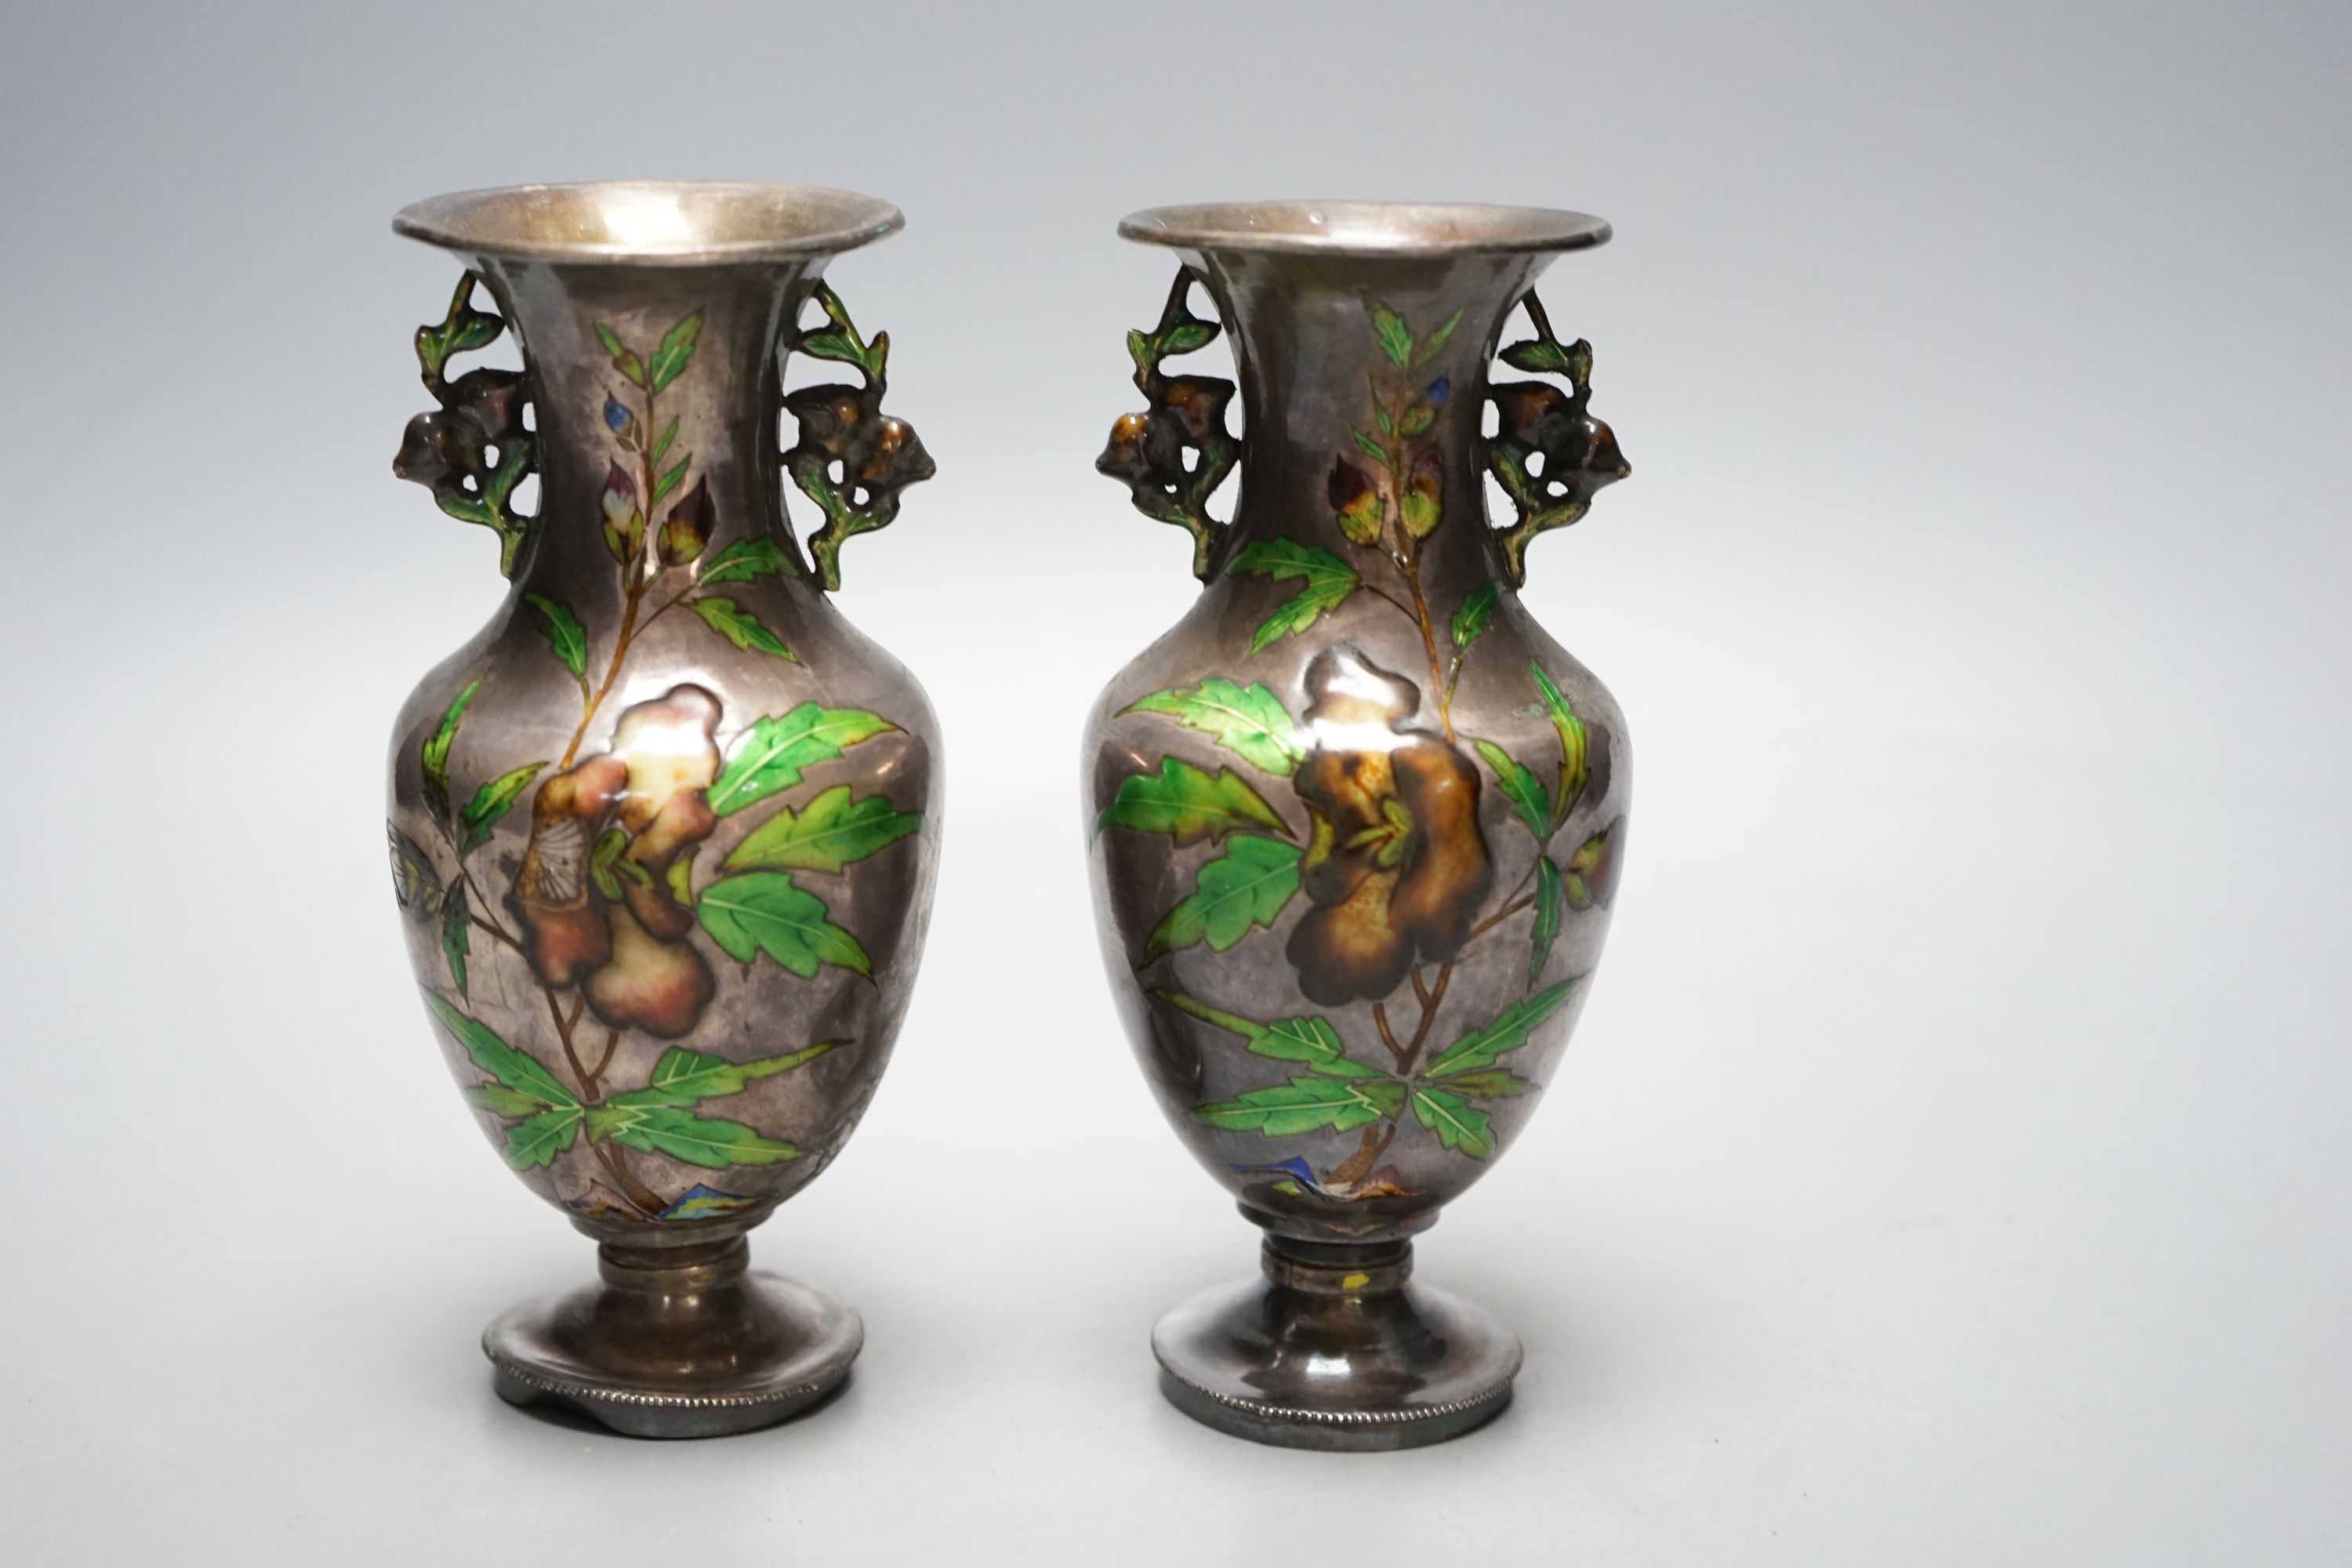 A pair of nice quality Chinese silver and enamel vases, late 19th century, 15 cms high.